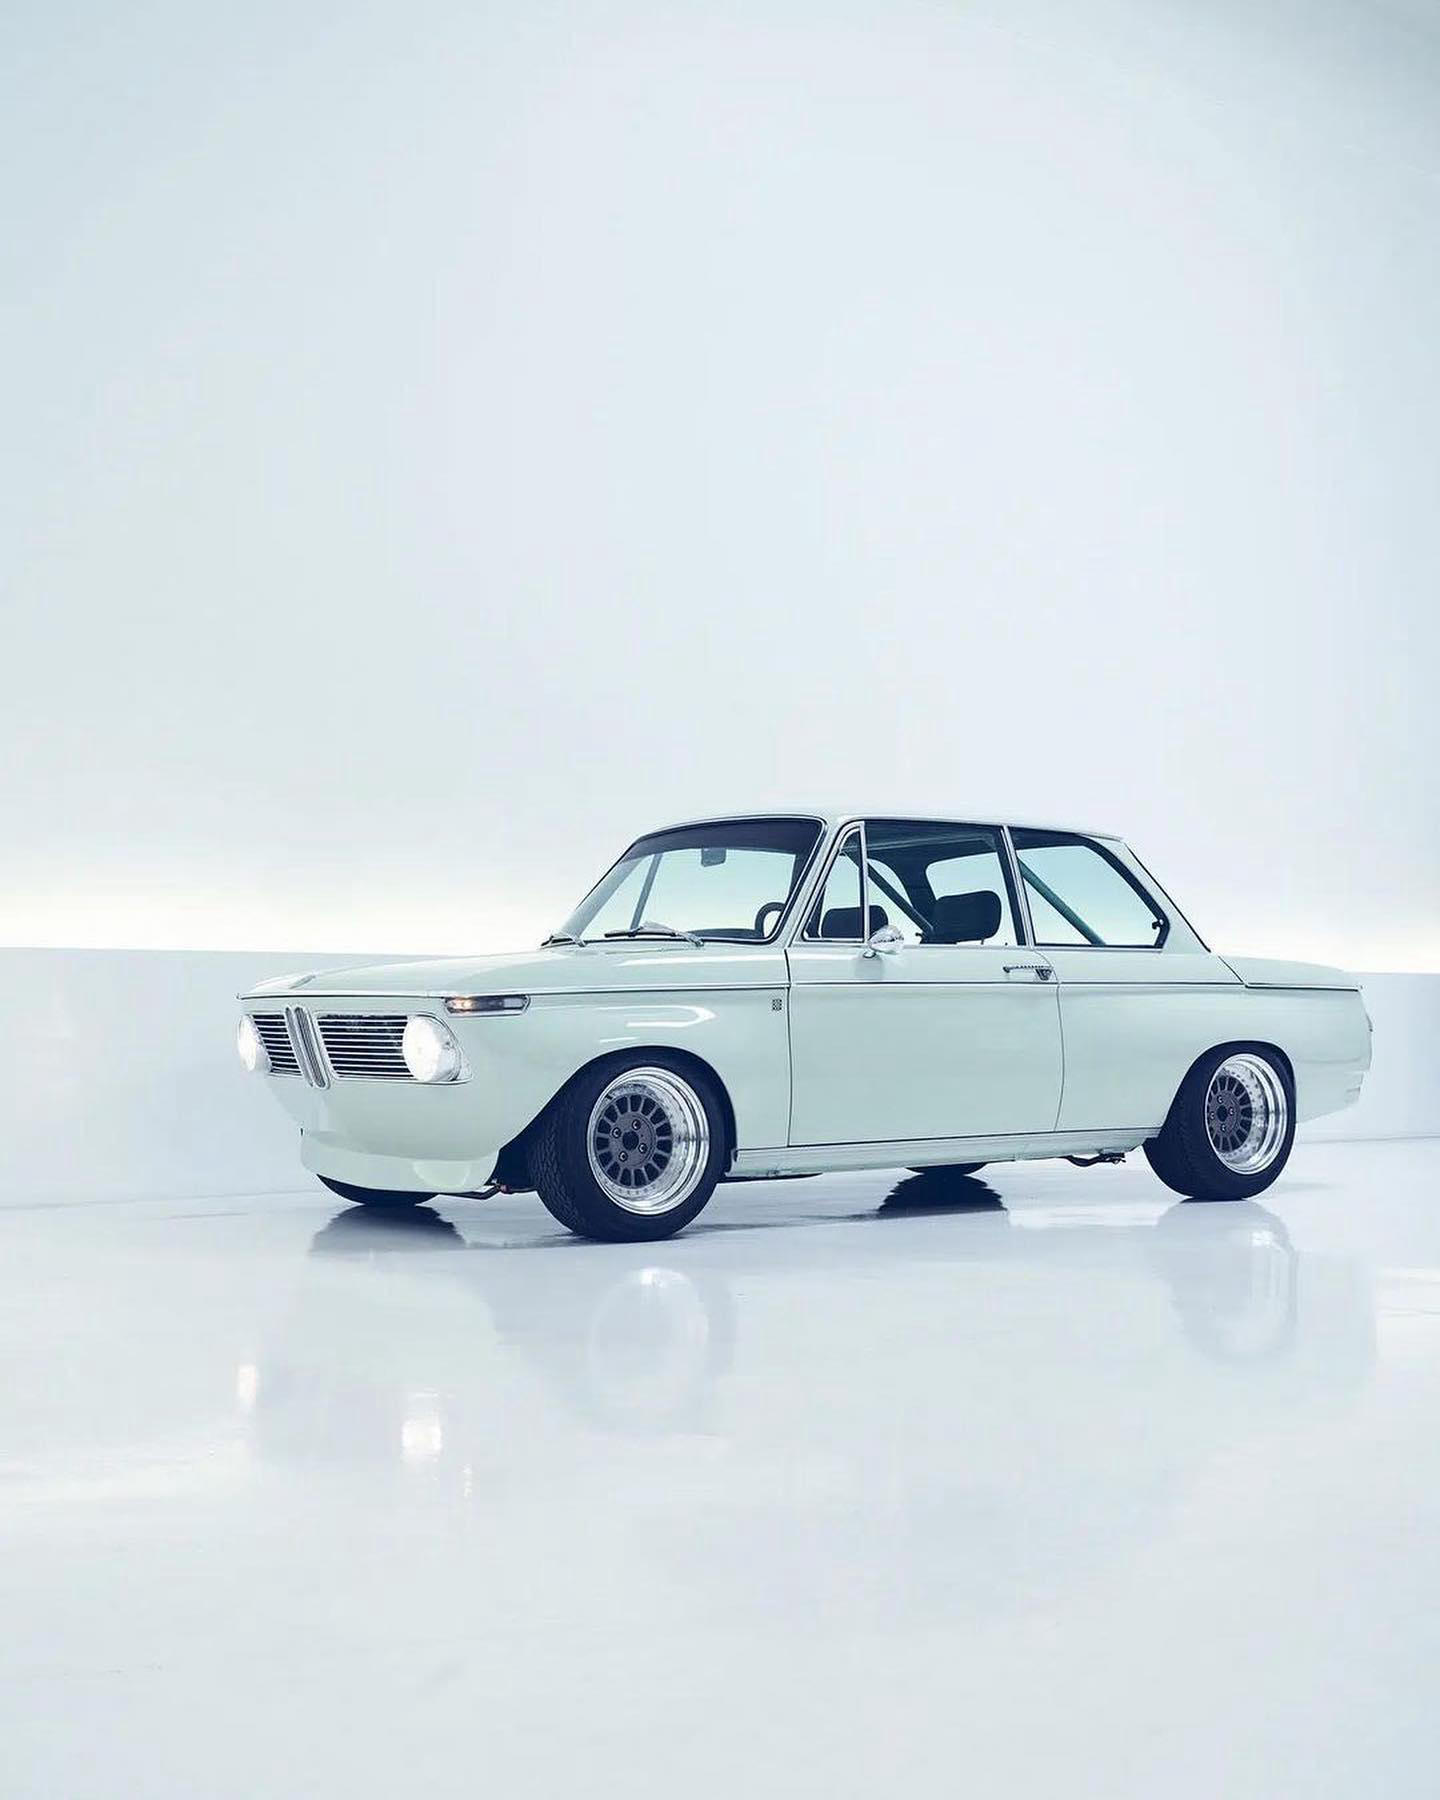 designboom magazine - the #SonofCobra BMW 2002 is a #carbonfiber image of perfection